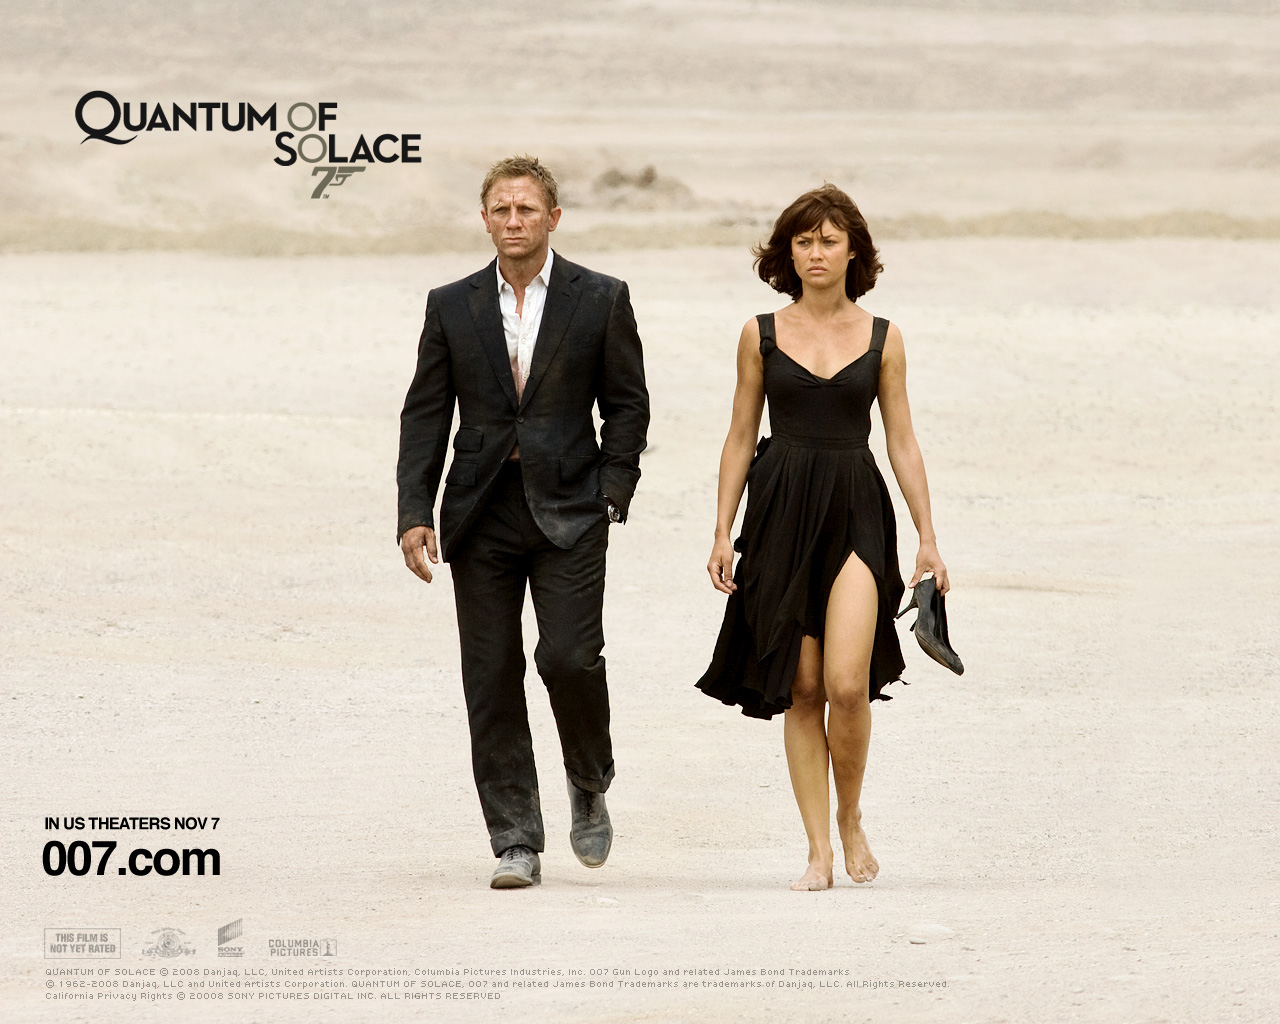 Download HQ 007 Quantum of Solace wallpaper / Movies / 1280x1024